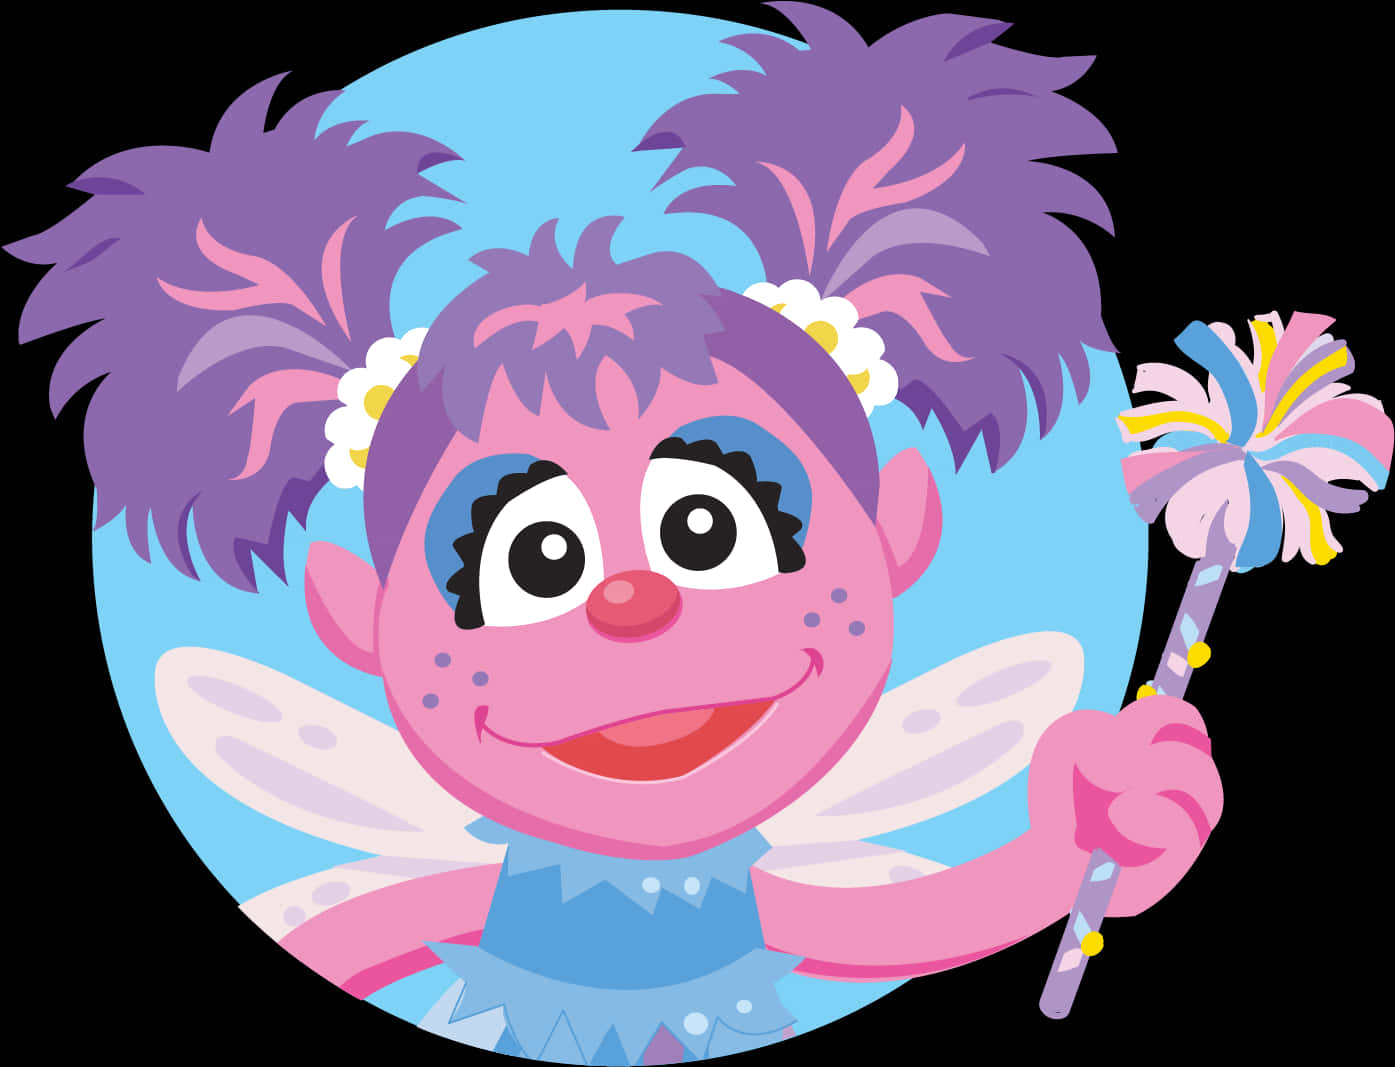 A Cartoon Of A Girl With Purple Hair Holding A Wand